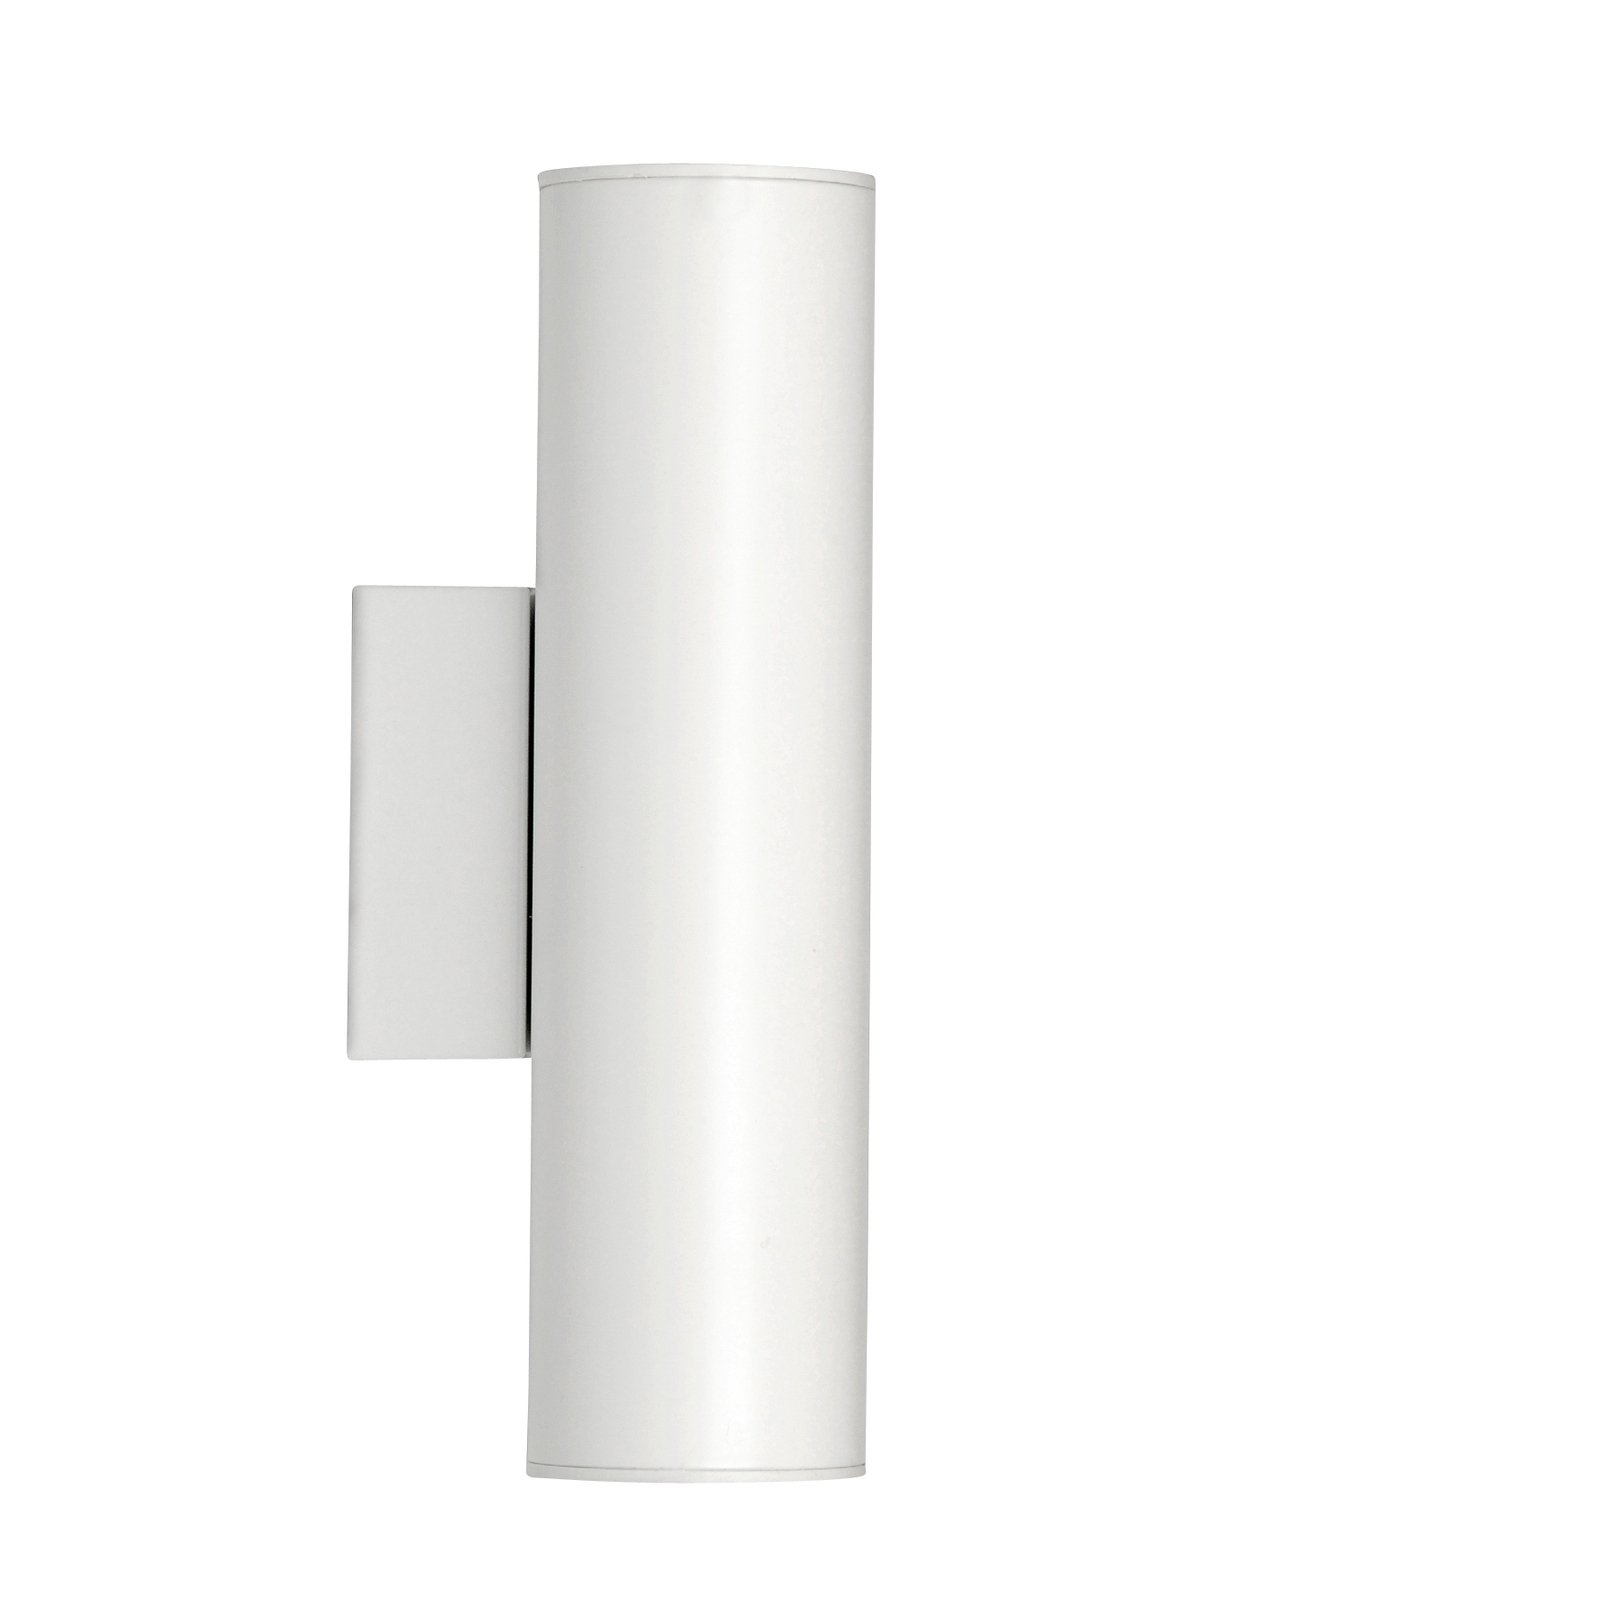 Milan Haul LED wall light up and down white